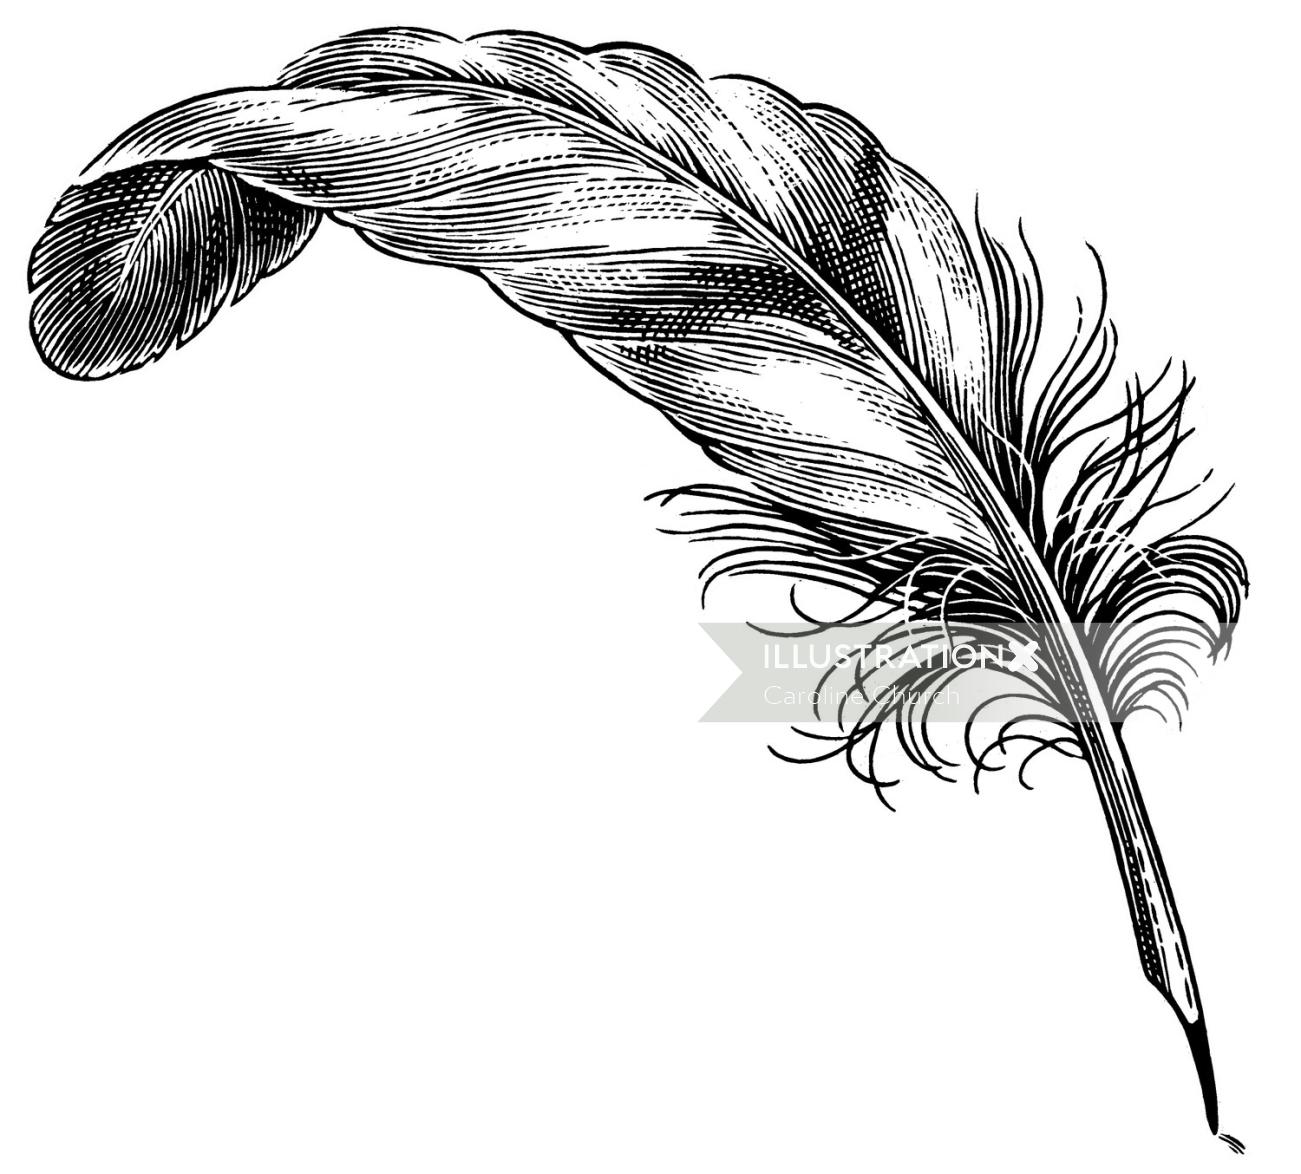 Feather quill line illustration
